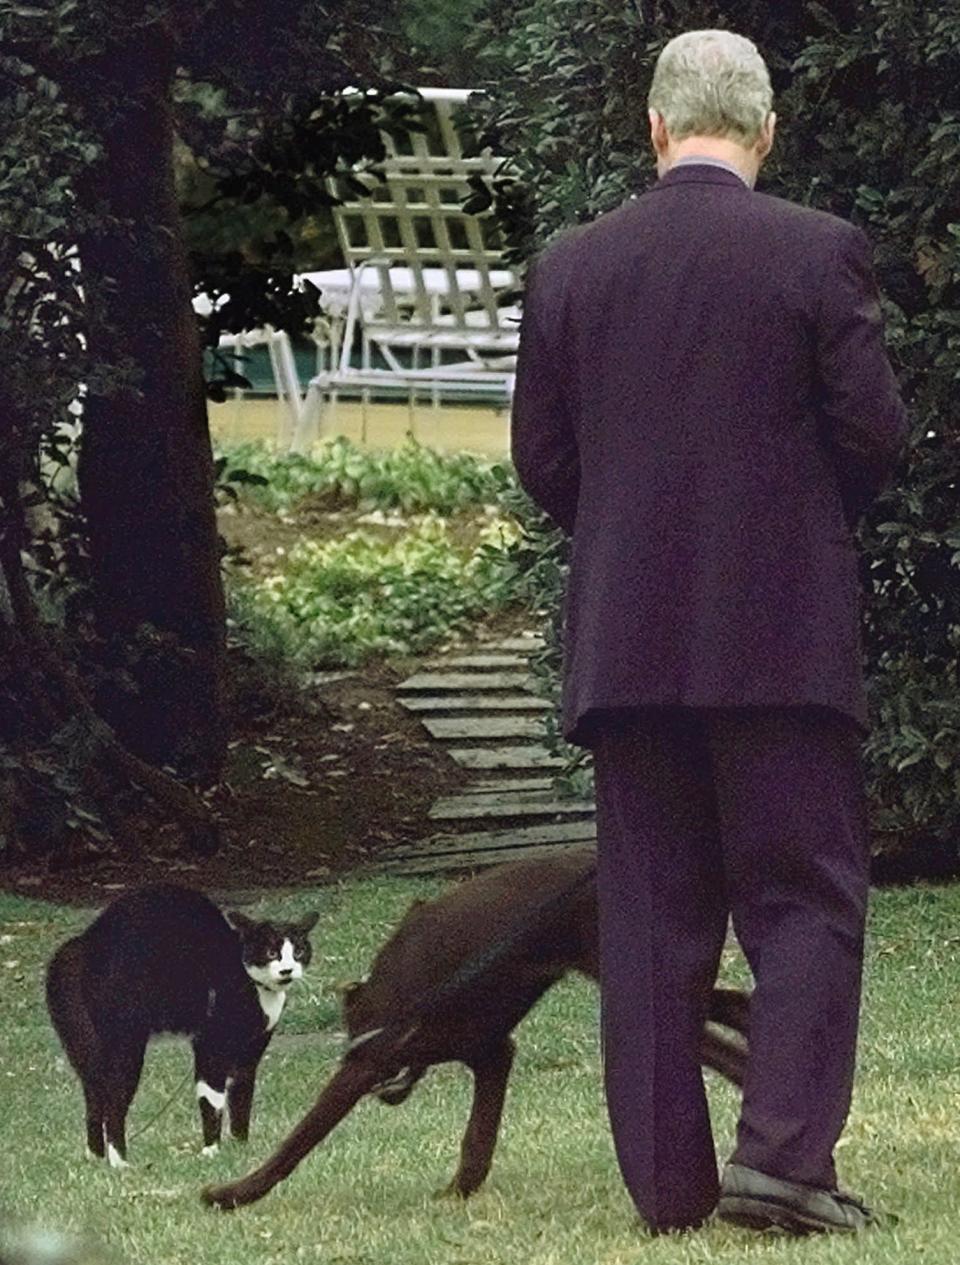 FILE - President Clinton tries to introduce his new dog Buddy to his cat Socks during a meeting outside the Oval Office at the White House on Jan. 6, 1998. President Joe Biden and first lady Jill Biden have added a green-eyed tabby from Pennsylvania to the White House family. She's the first feline tenant since President George W. Bush’s controversially named cat India. With Presidents James K. Polk and Donald Trump among notable, no-pets exceptions, animals have a long history in the White House. (AP Photo/Greg Gibson, File)